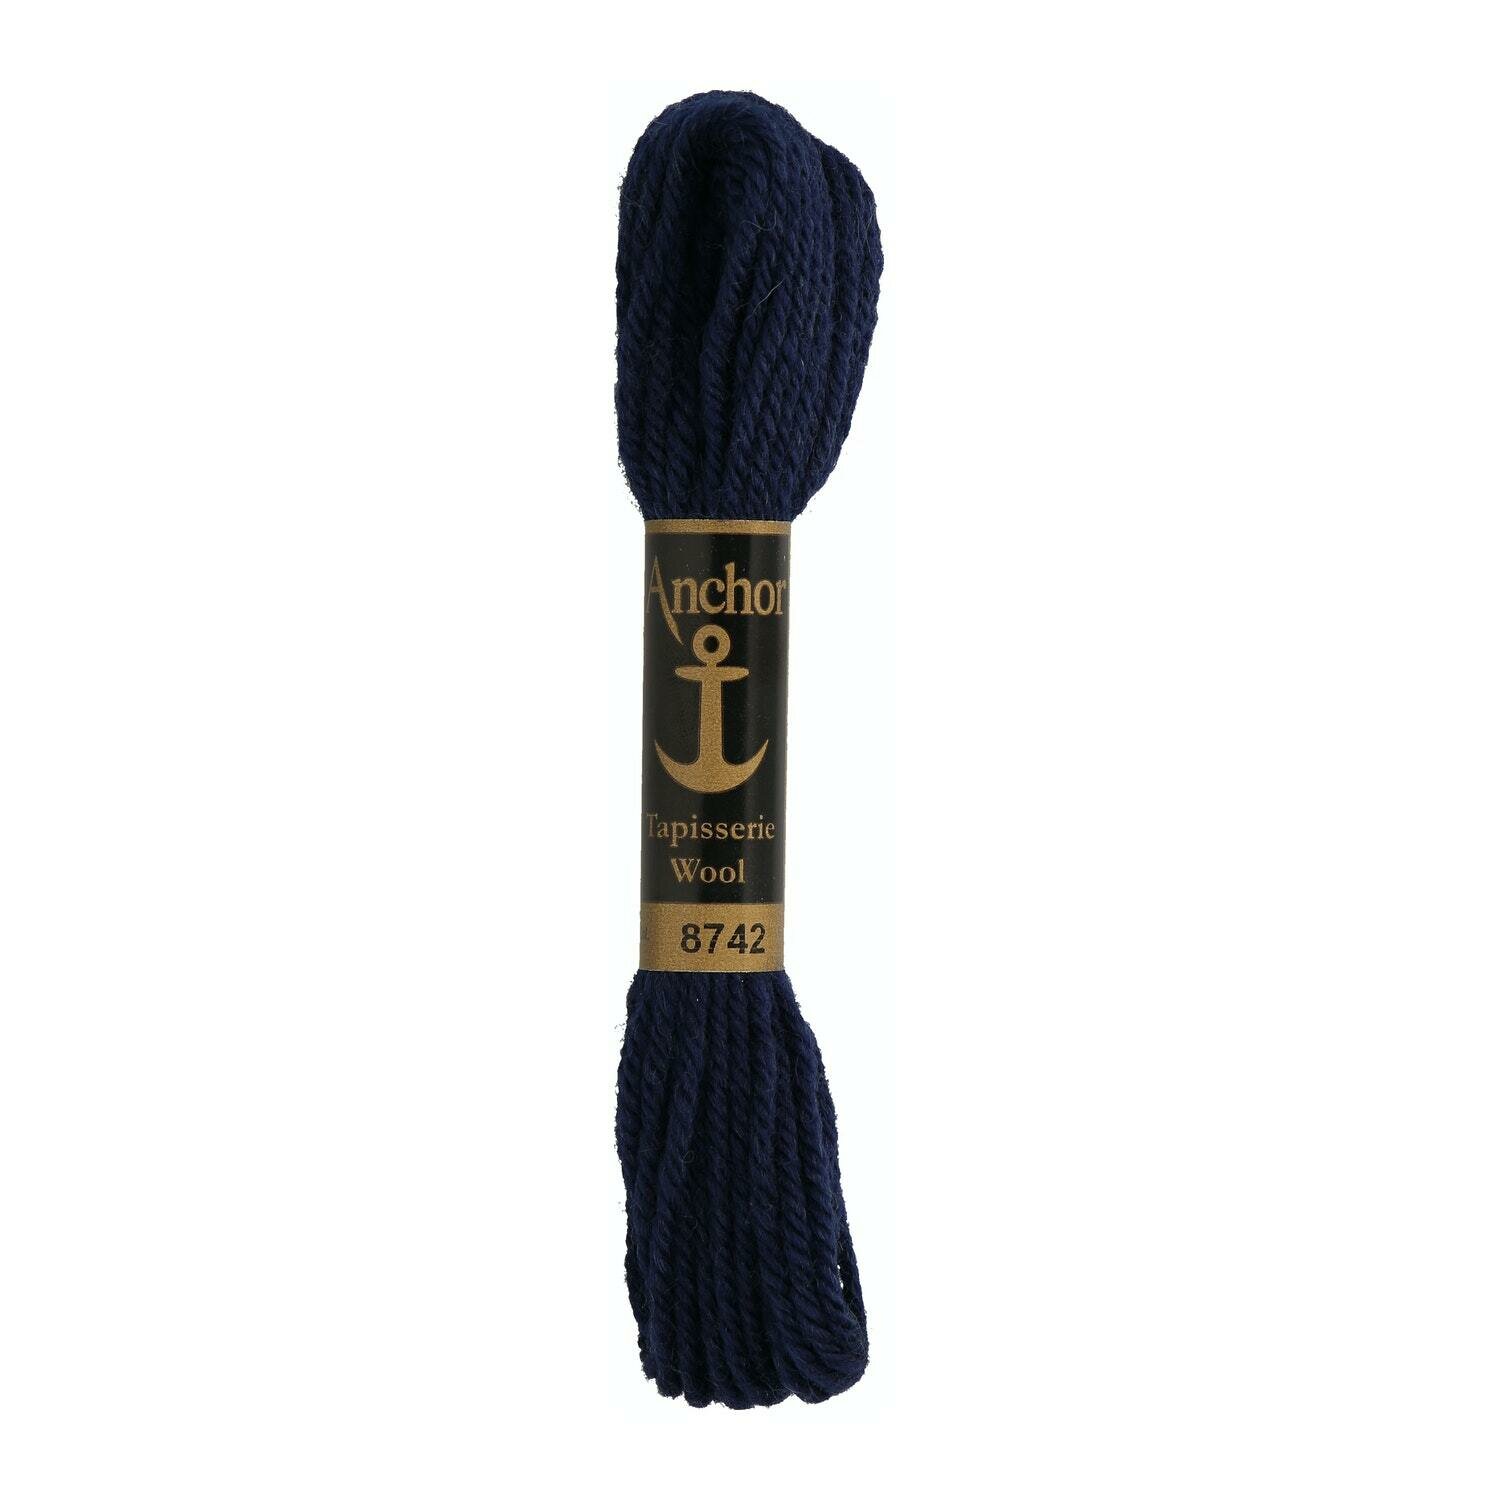 Anchor Tapisserie Wool #  08742